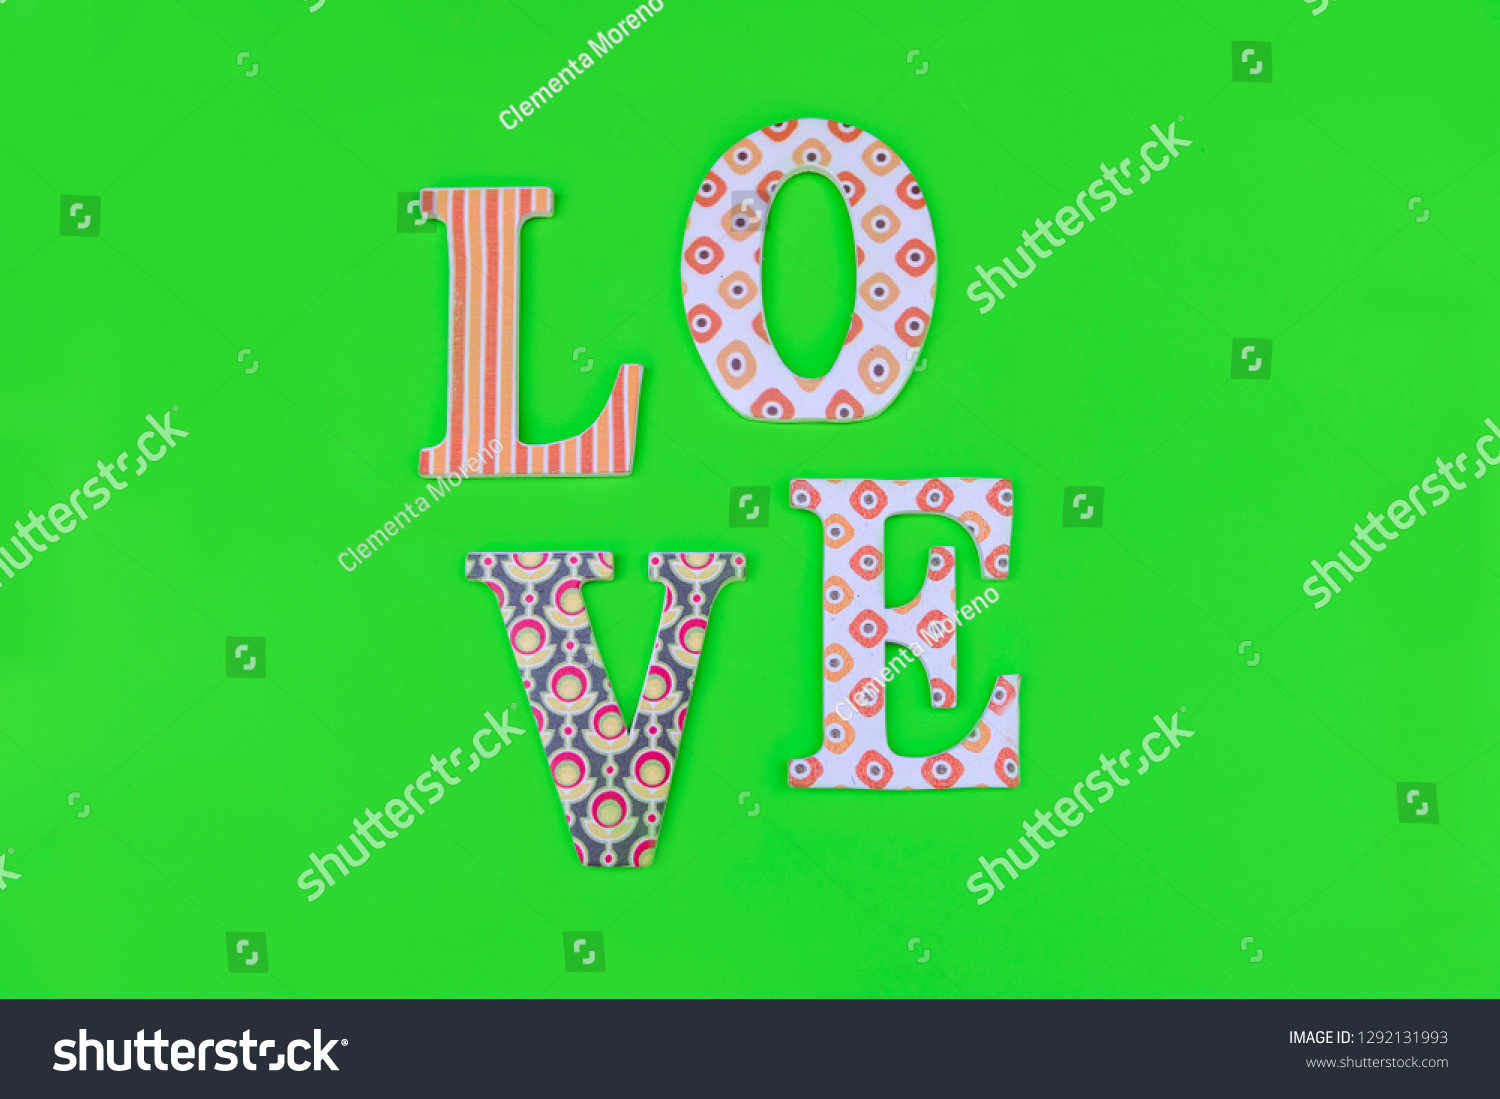 Vintage wooden love letters on green background with copy space. Romanticism concept. #1292131993